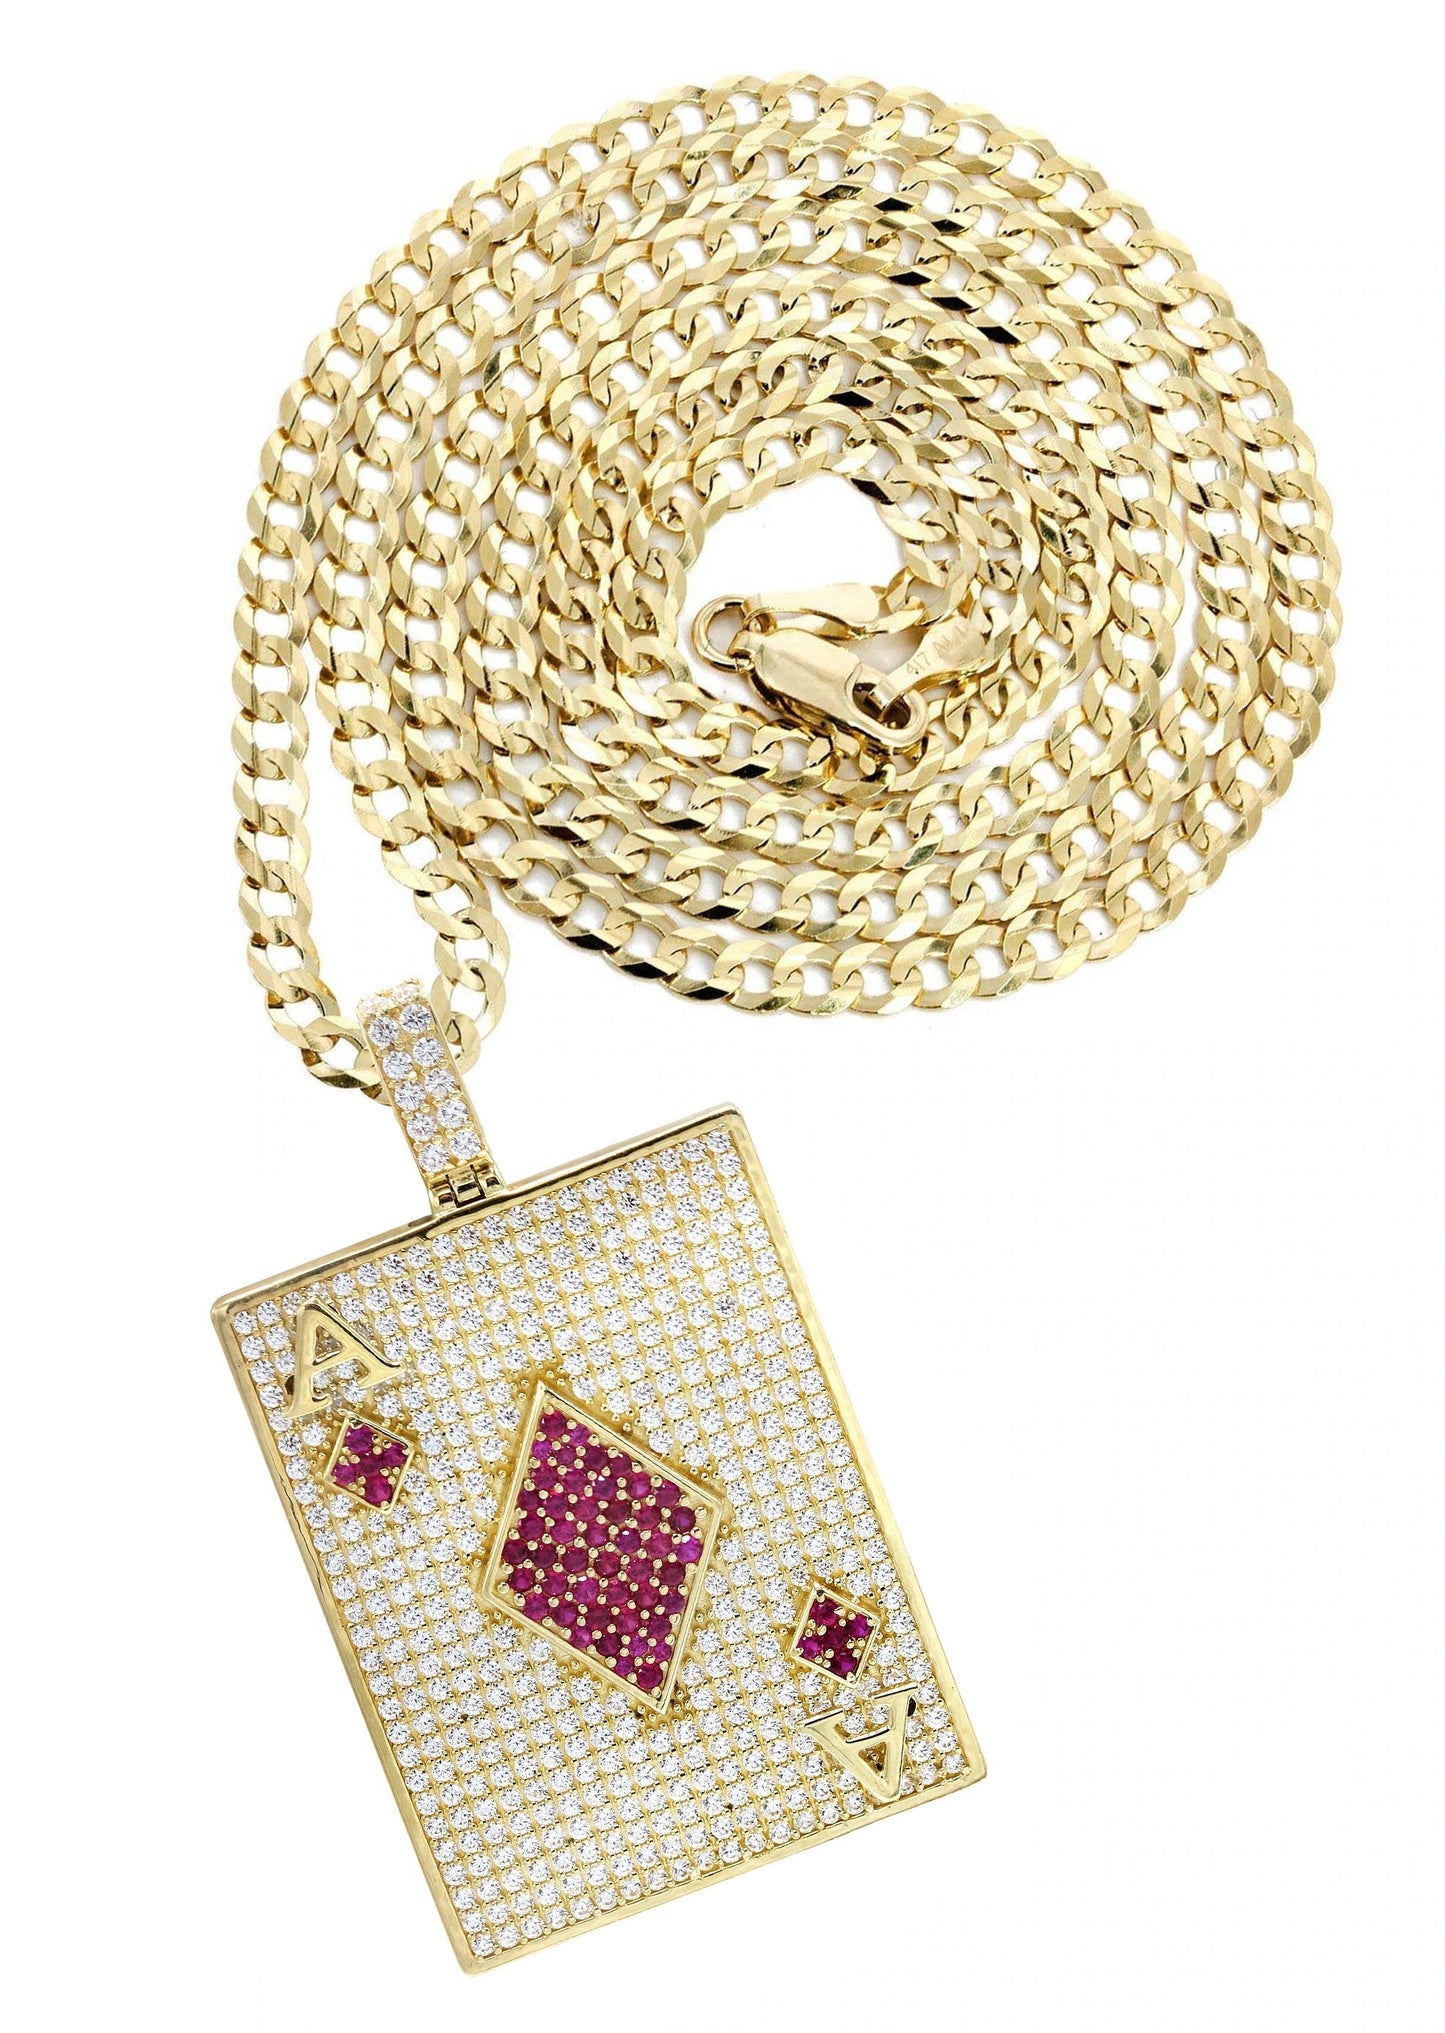 10K Yellow Gold Chain & Cz Ace Of Spades Pendant